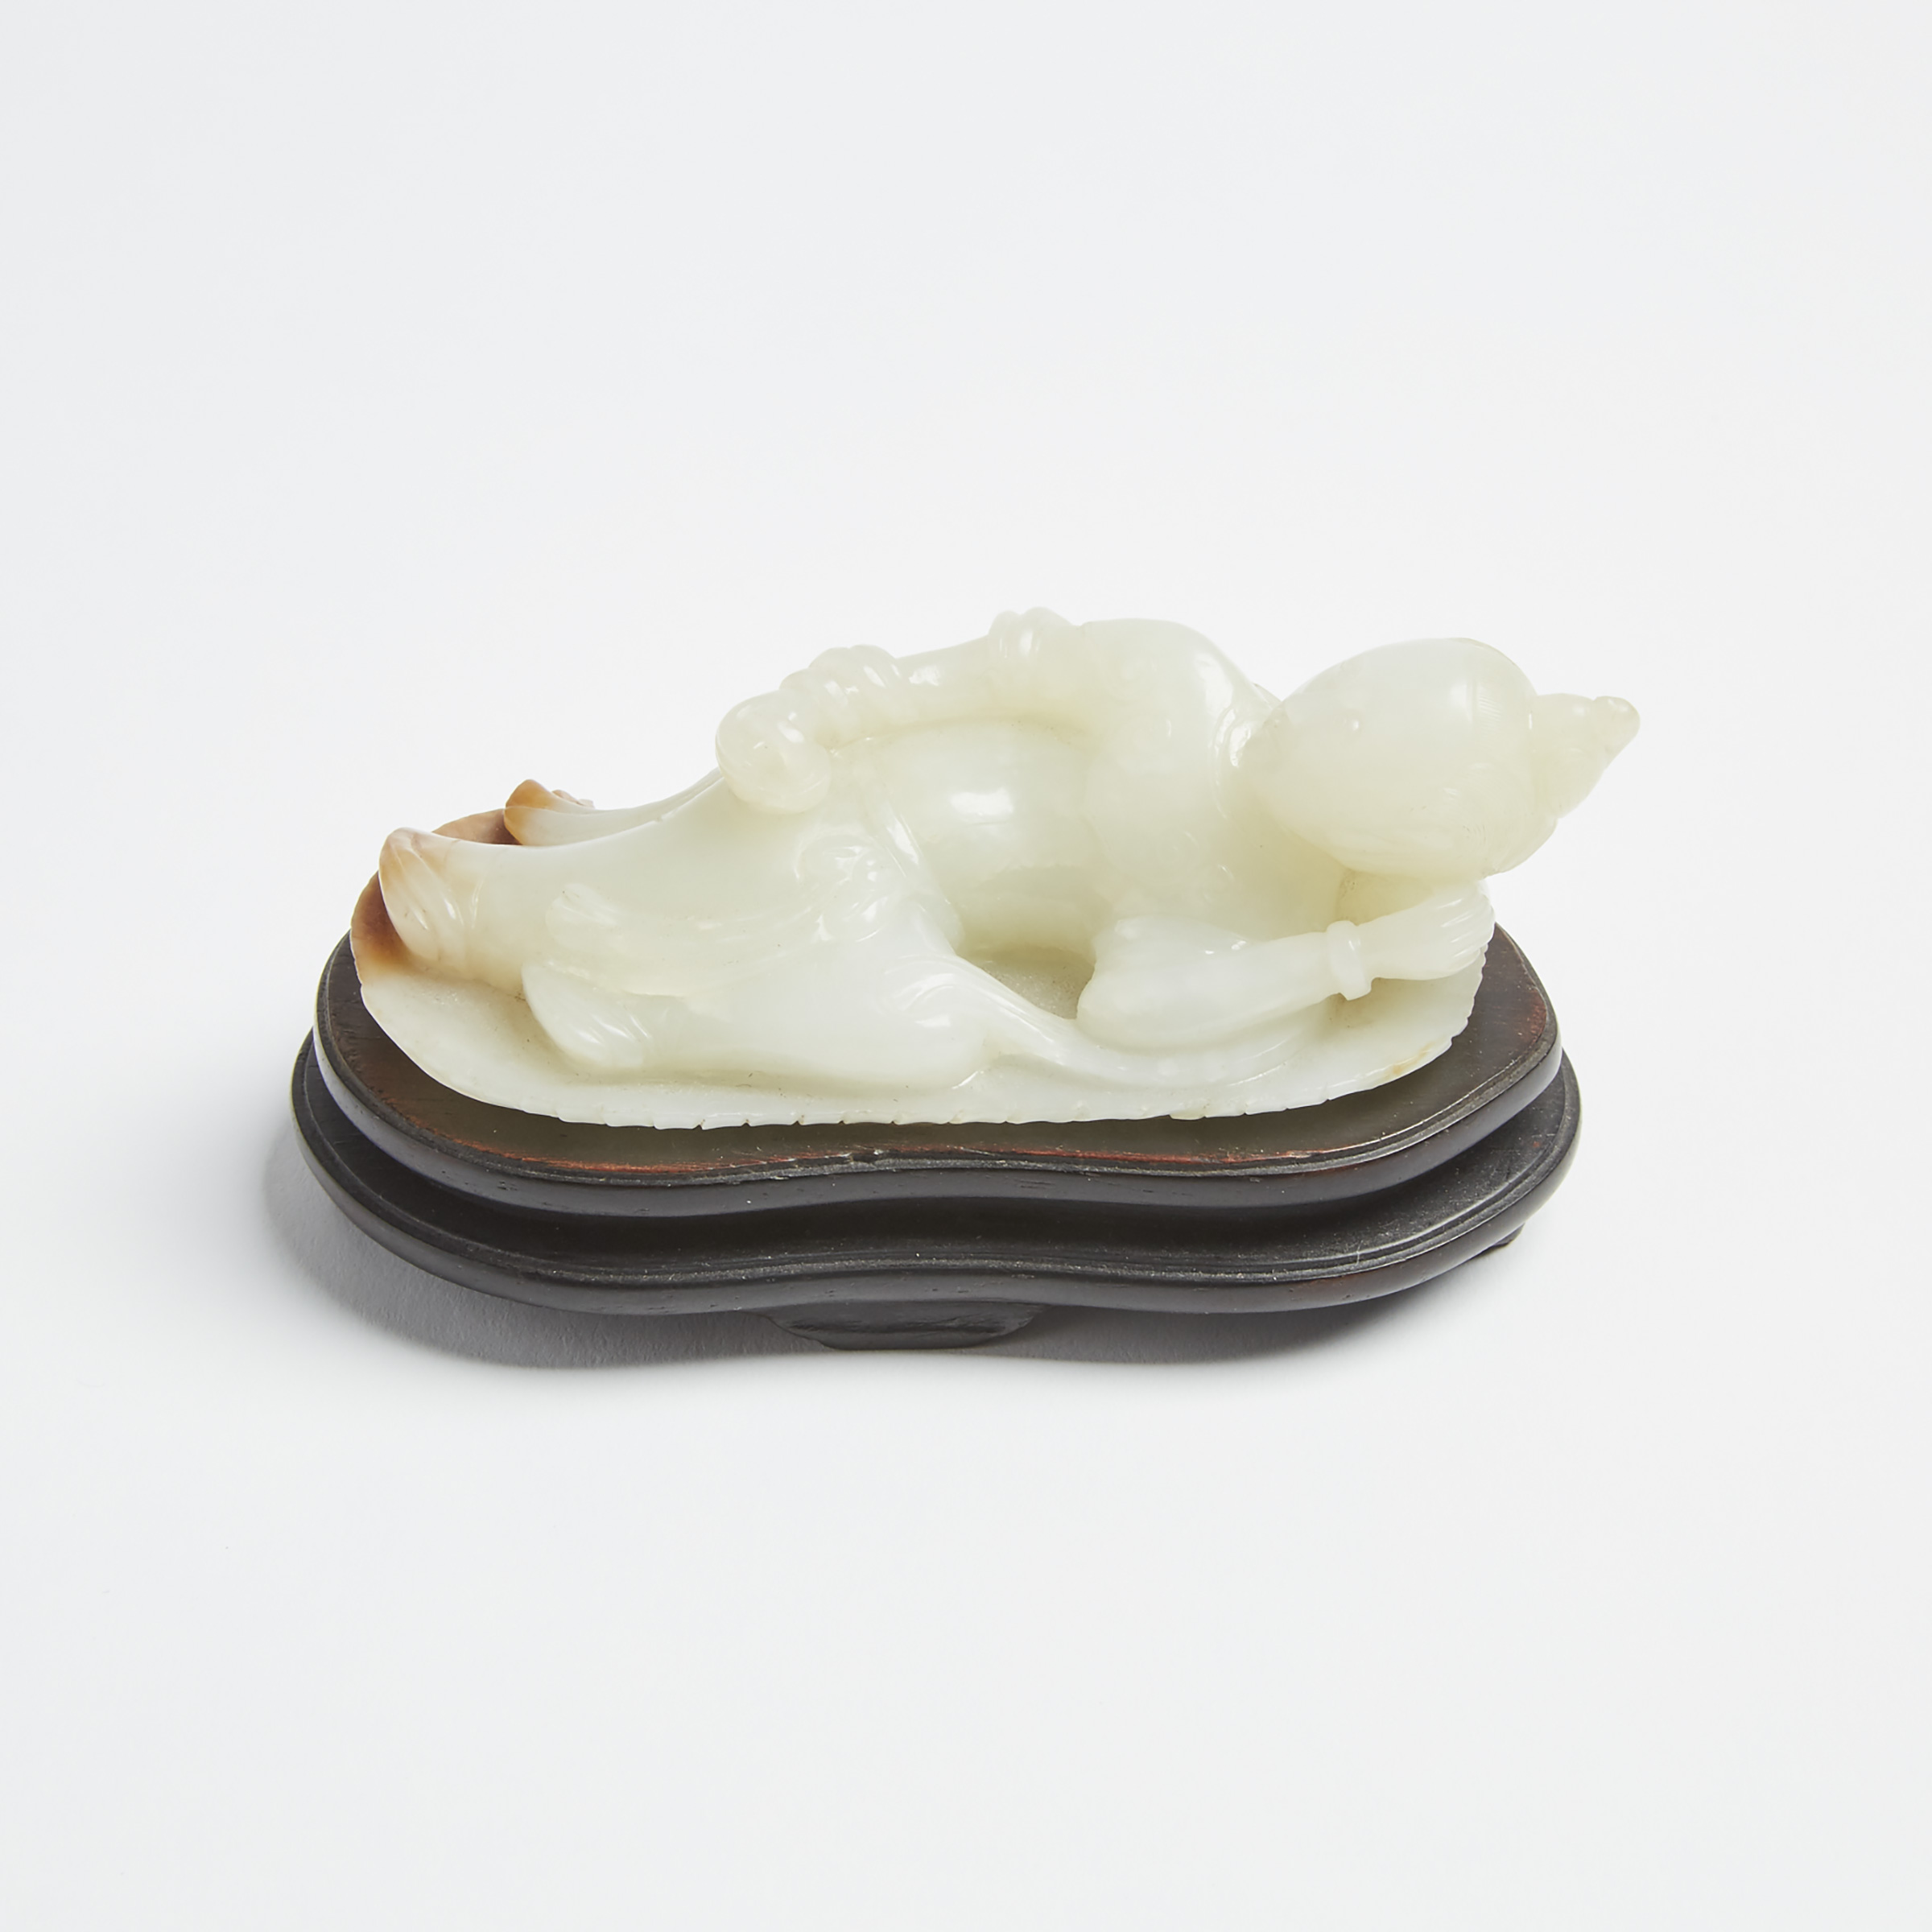 A White and Russet Jade Carving of a Reclining Figure